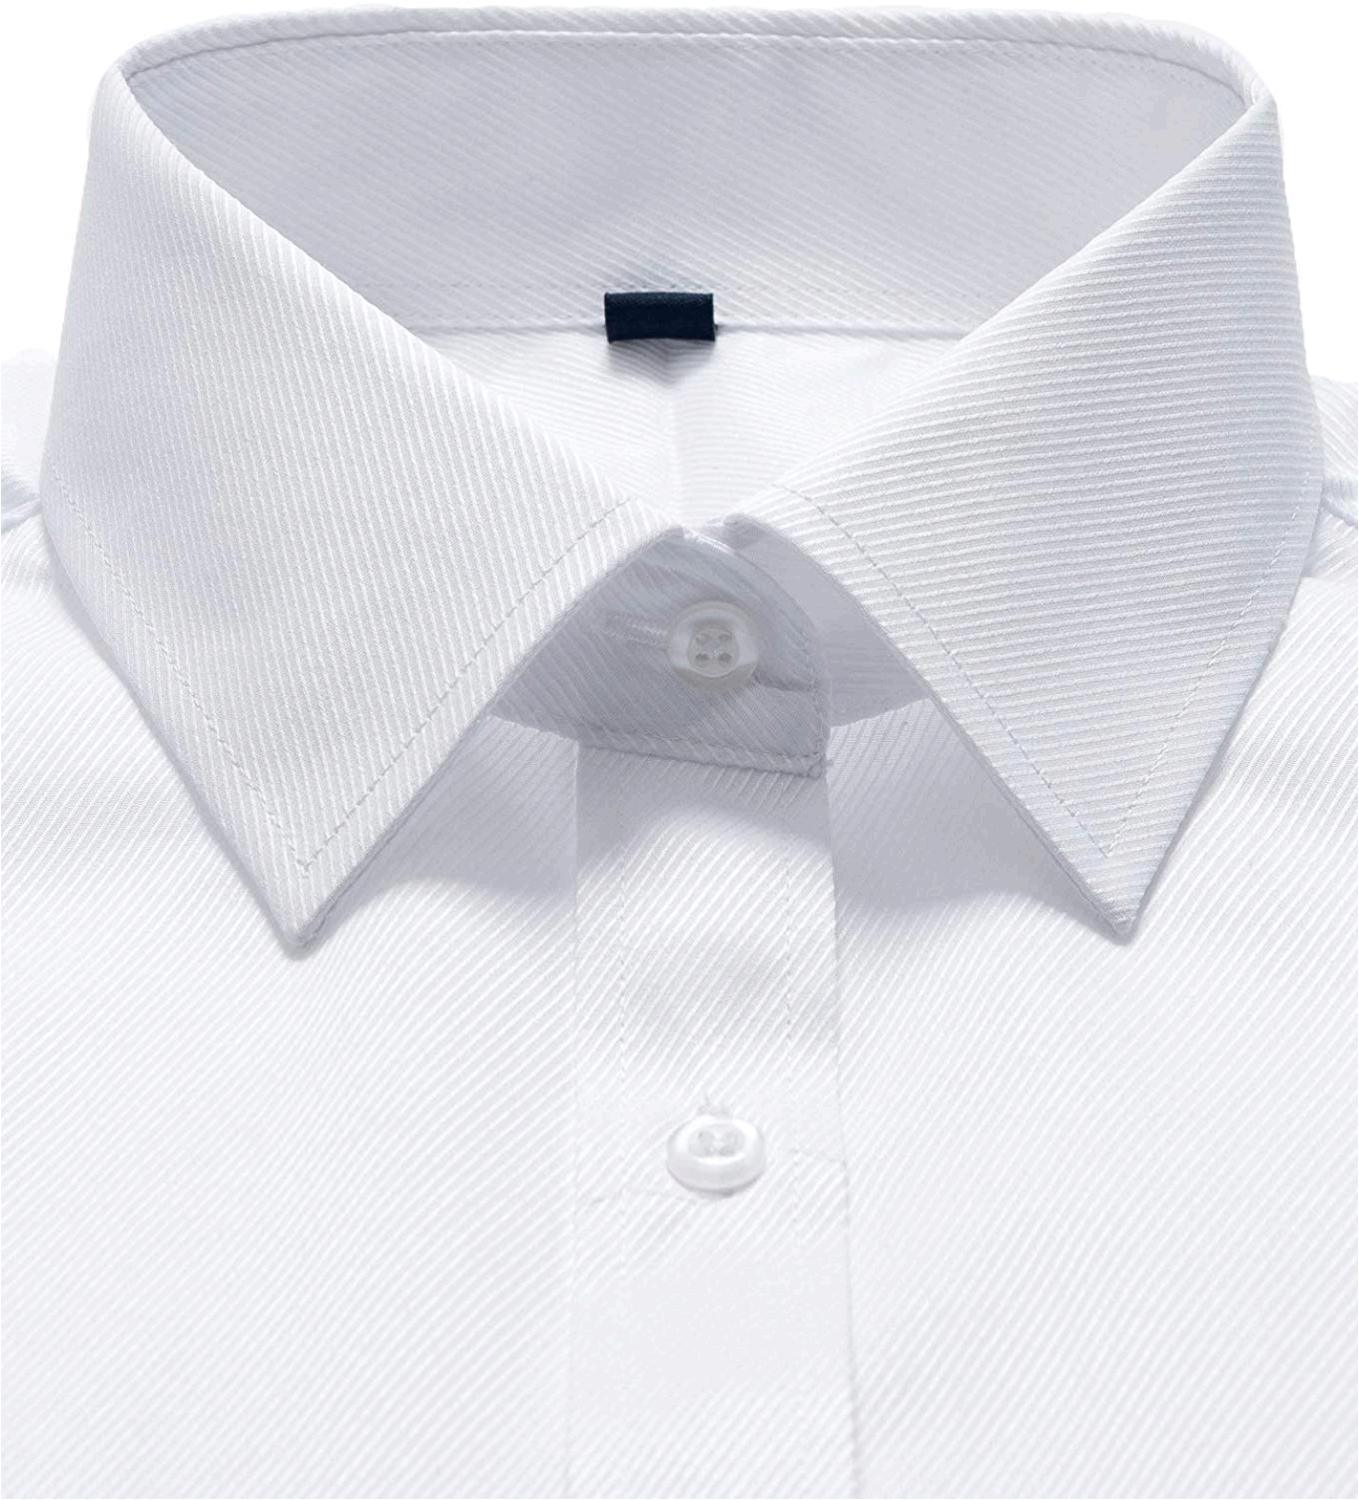 Alimens & Gentle French Cuff Regular Fit Dress Shirts, White New, Size ...